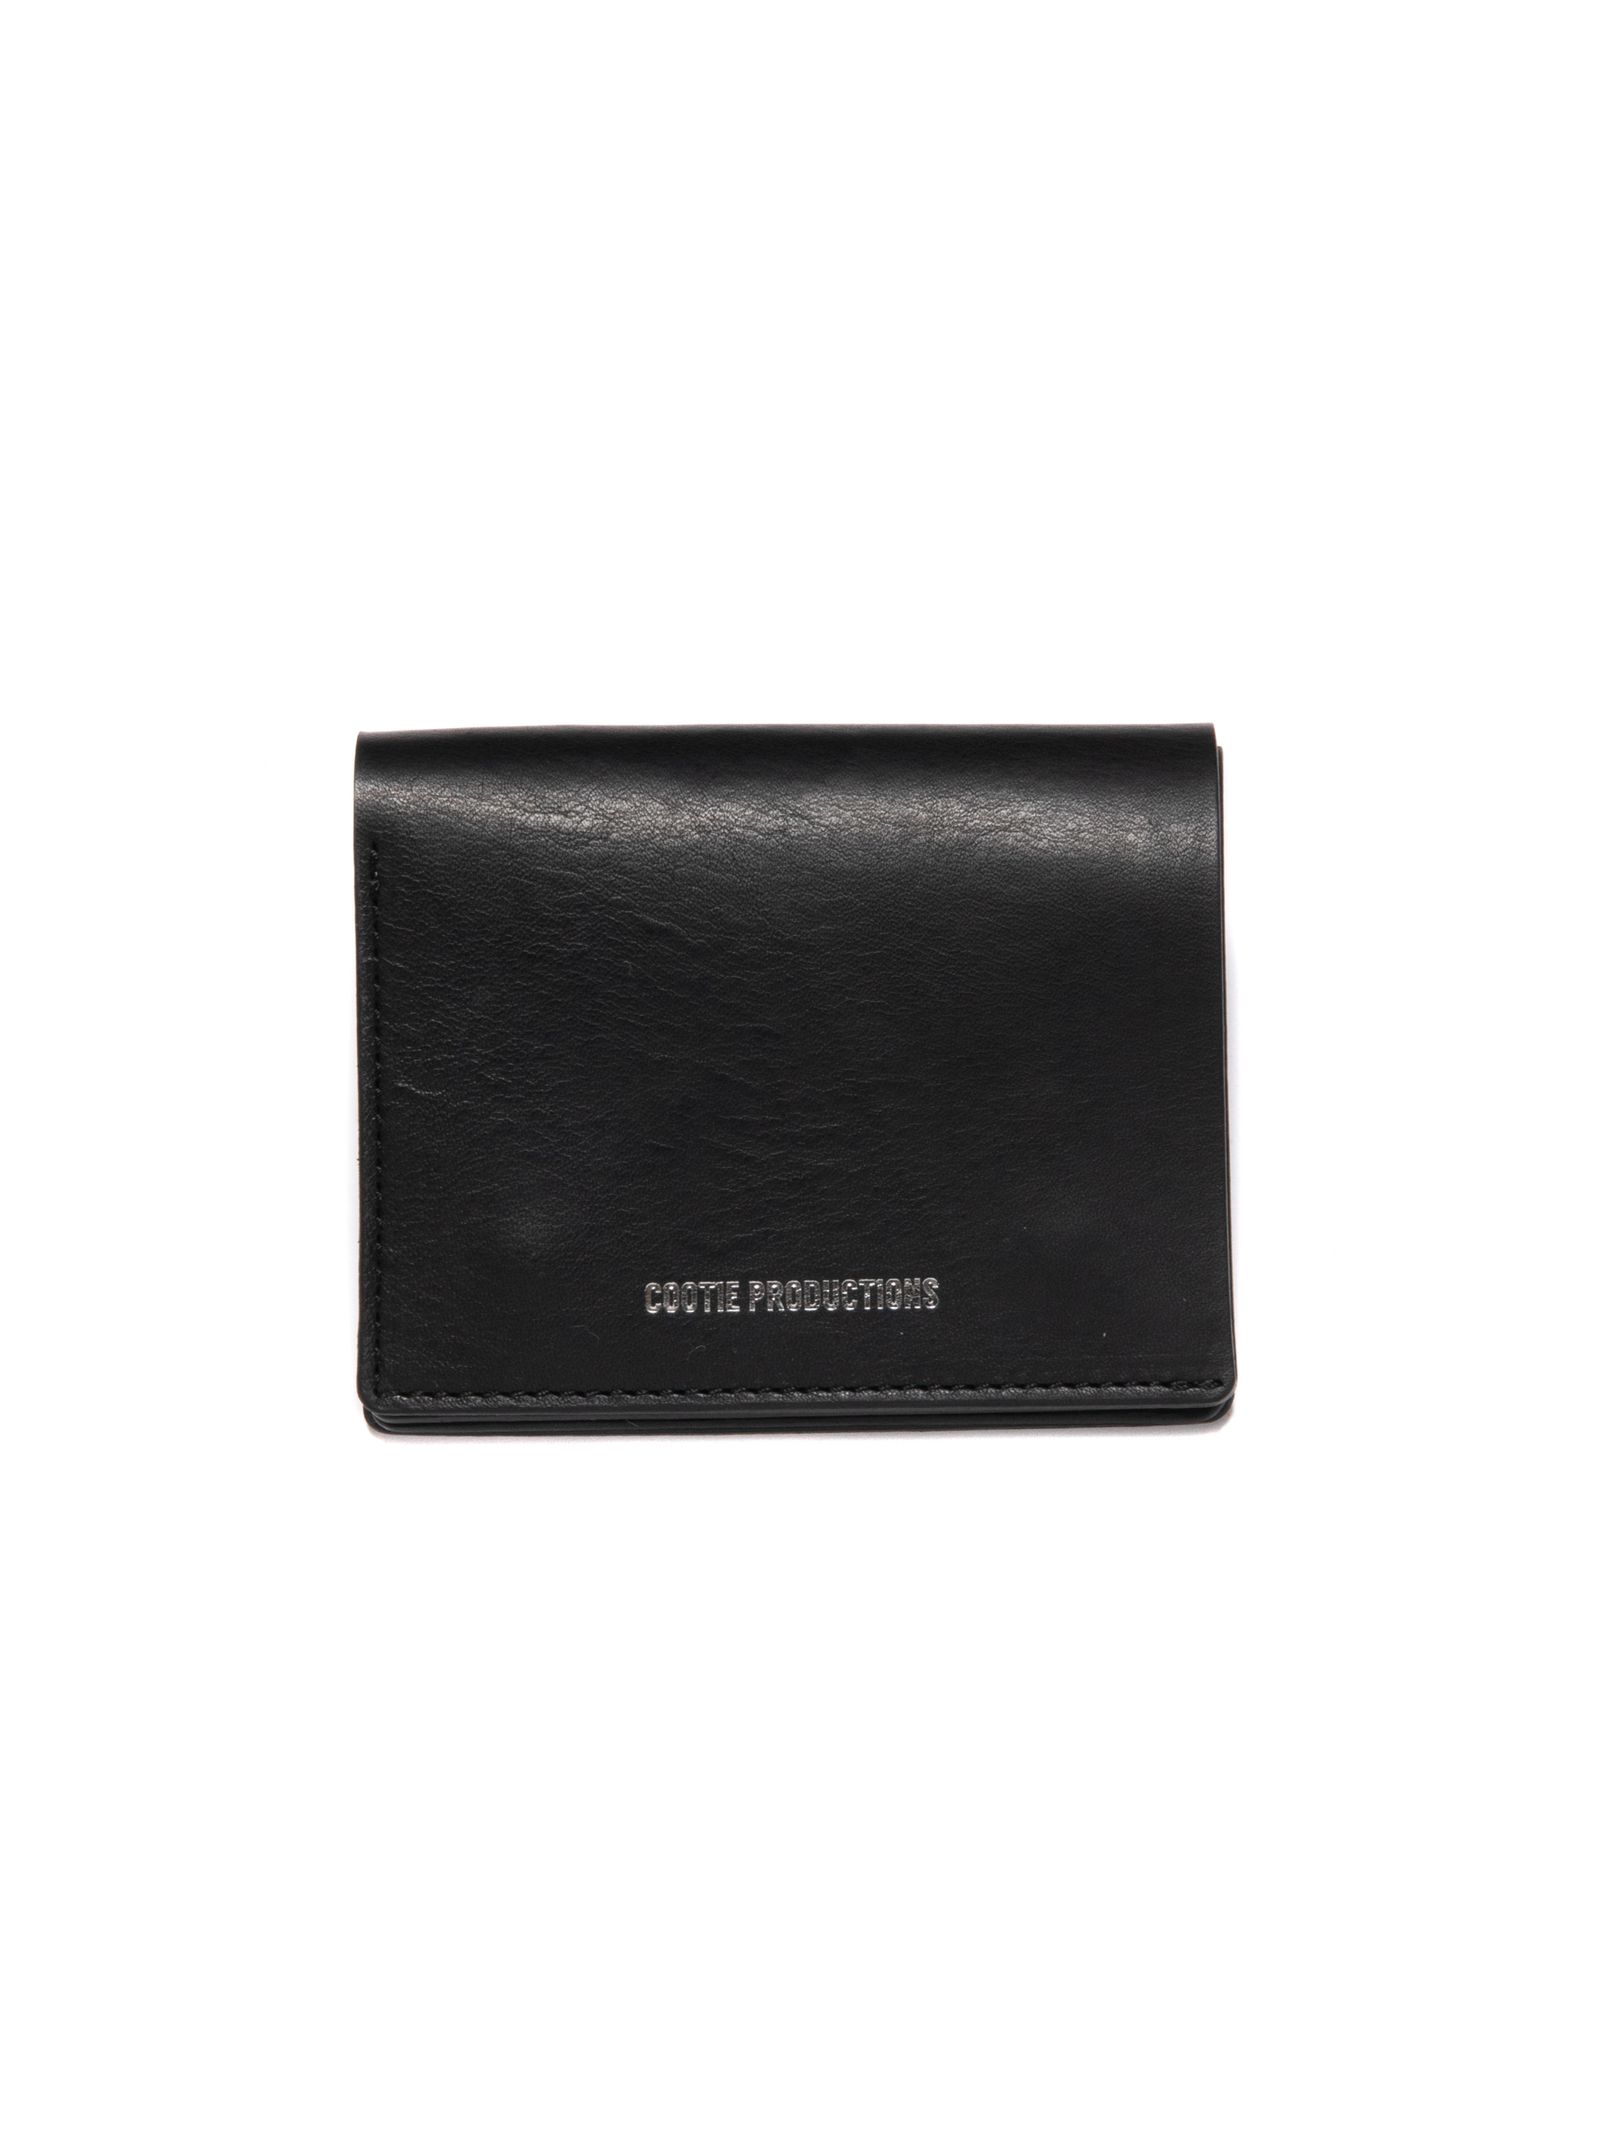 COOTIE PRODUCTIONS - LEATHER COMPACT PURSE (BLACK) / レザー